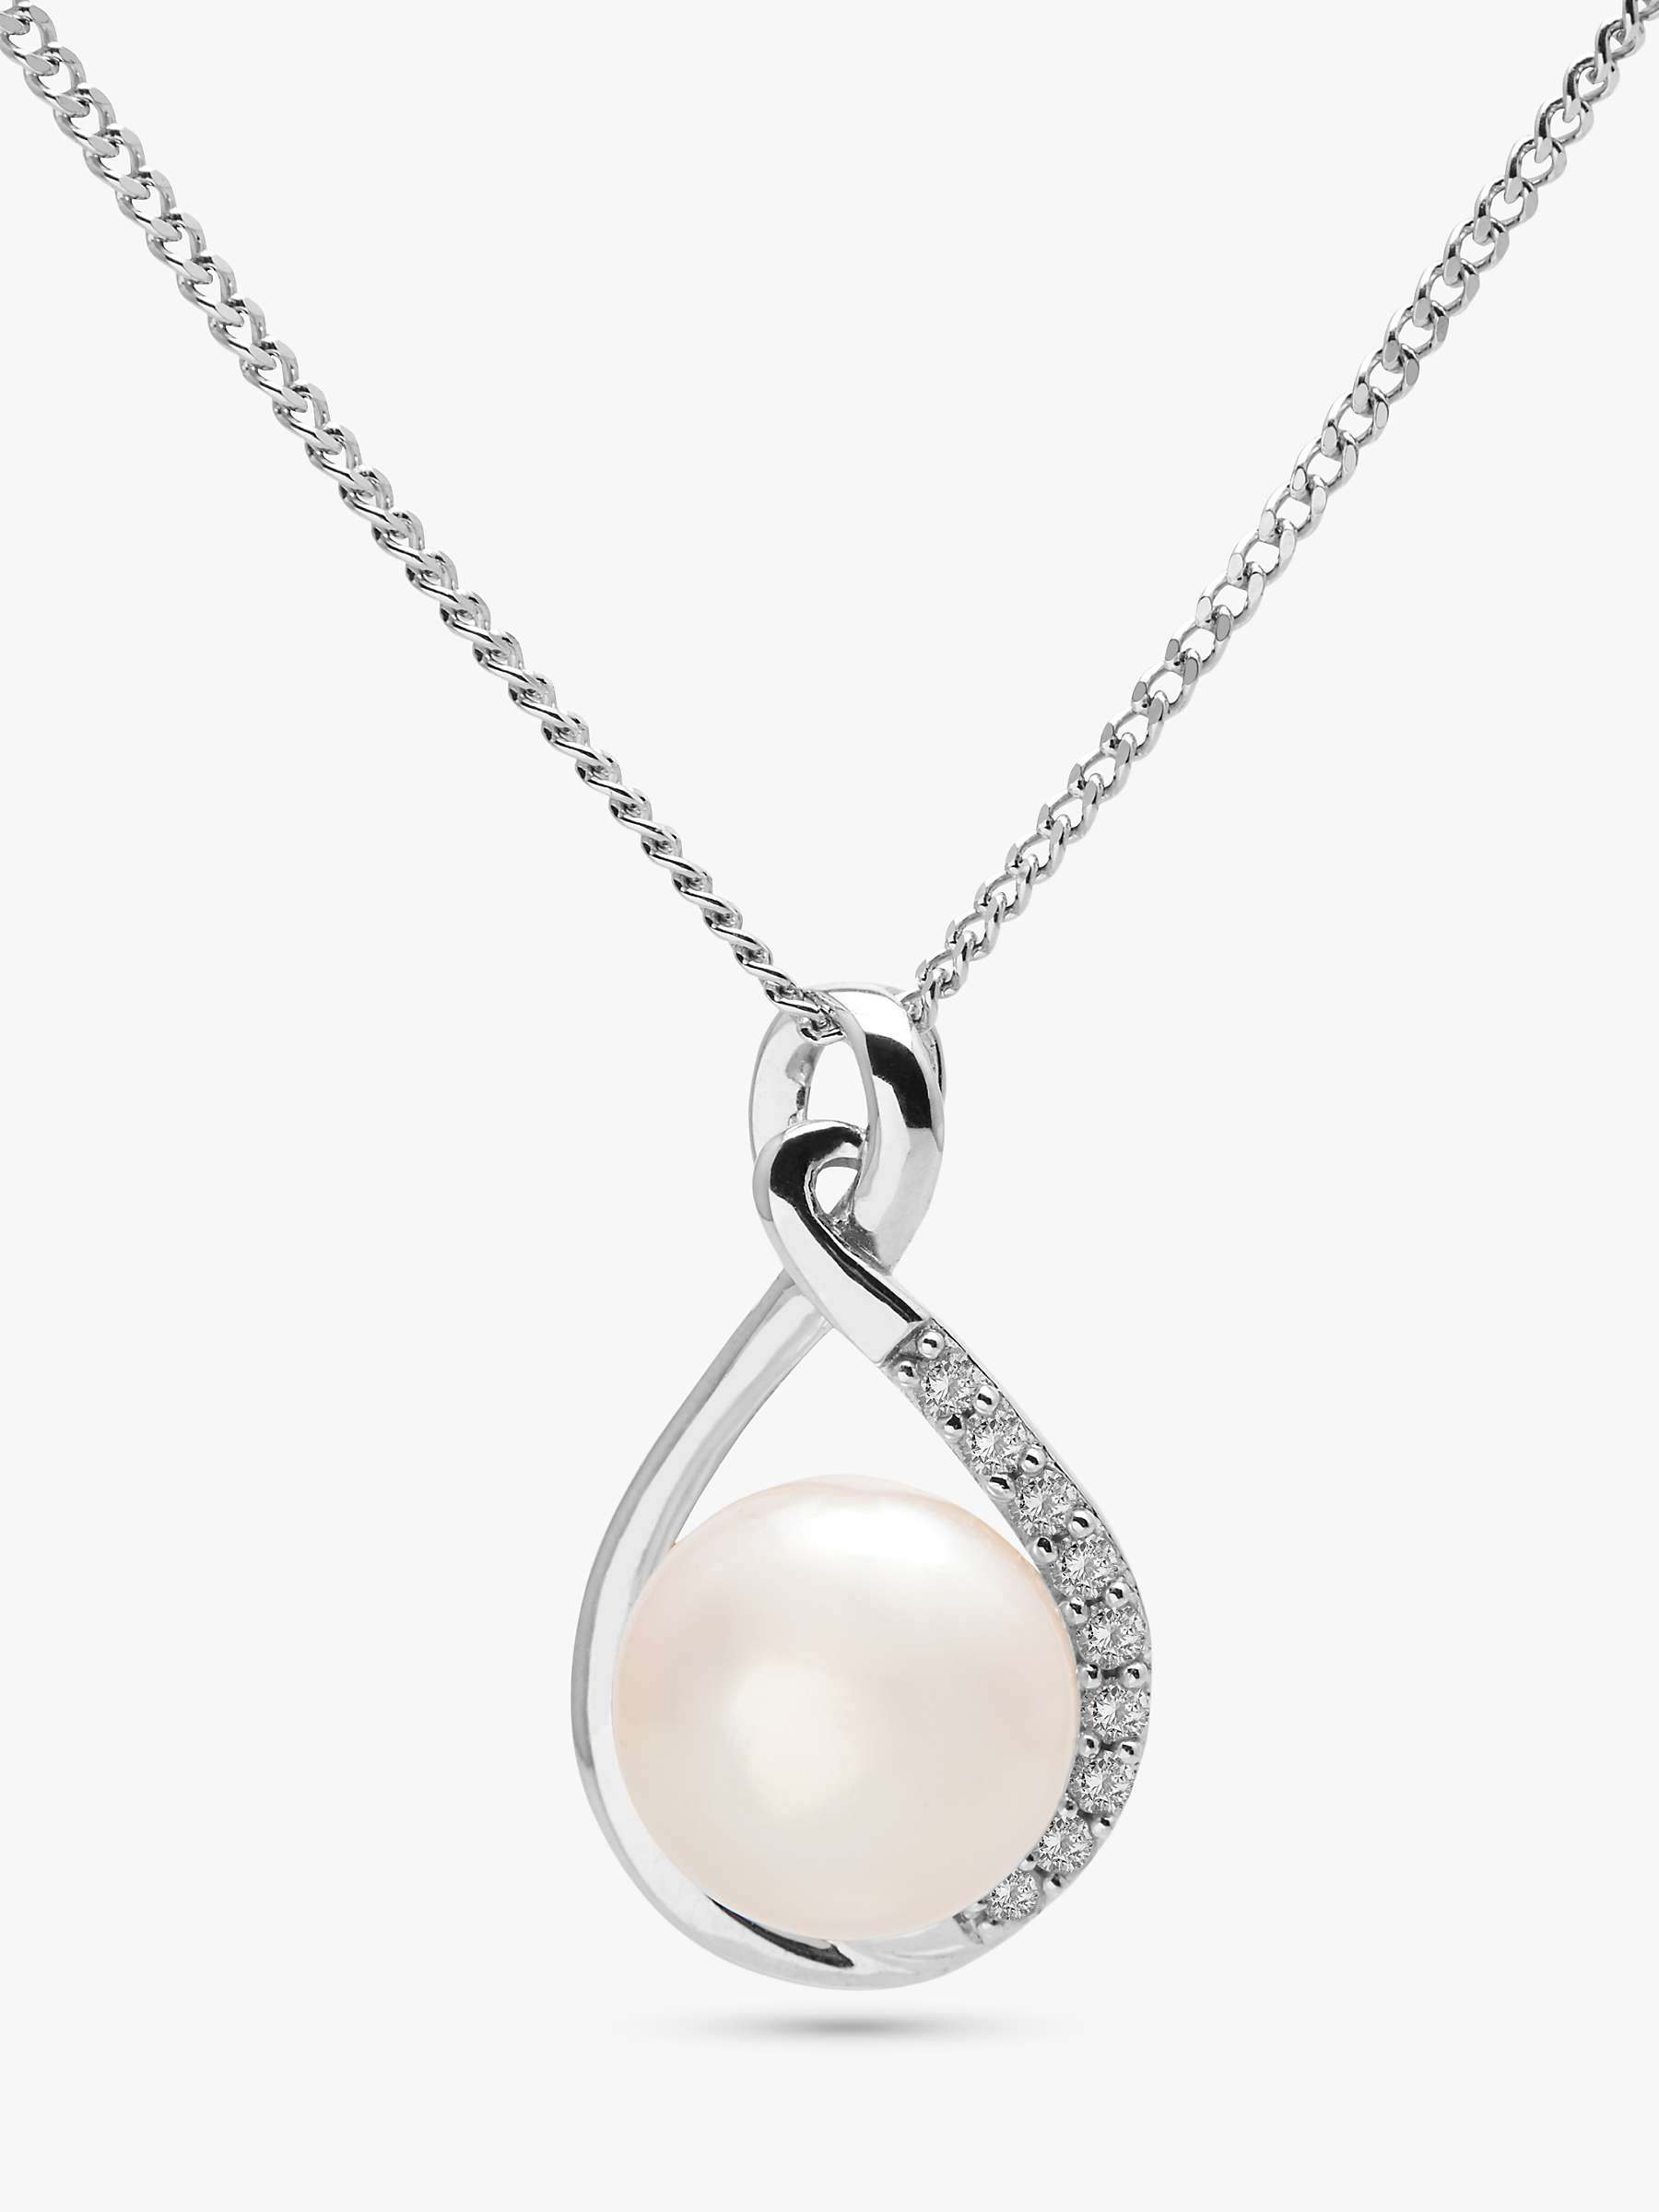 Buy A B Davis 9ct White Gold Freshwater Pearl and Diamond Teardrop Pendant Necklace, Silver/White Online at johnlewis.com